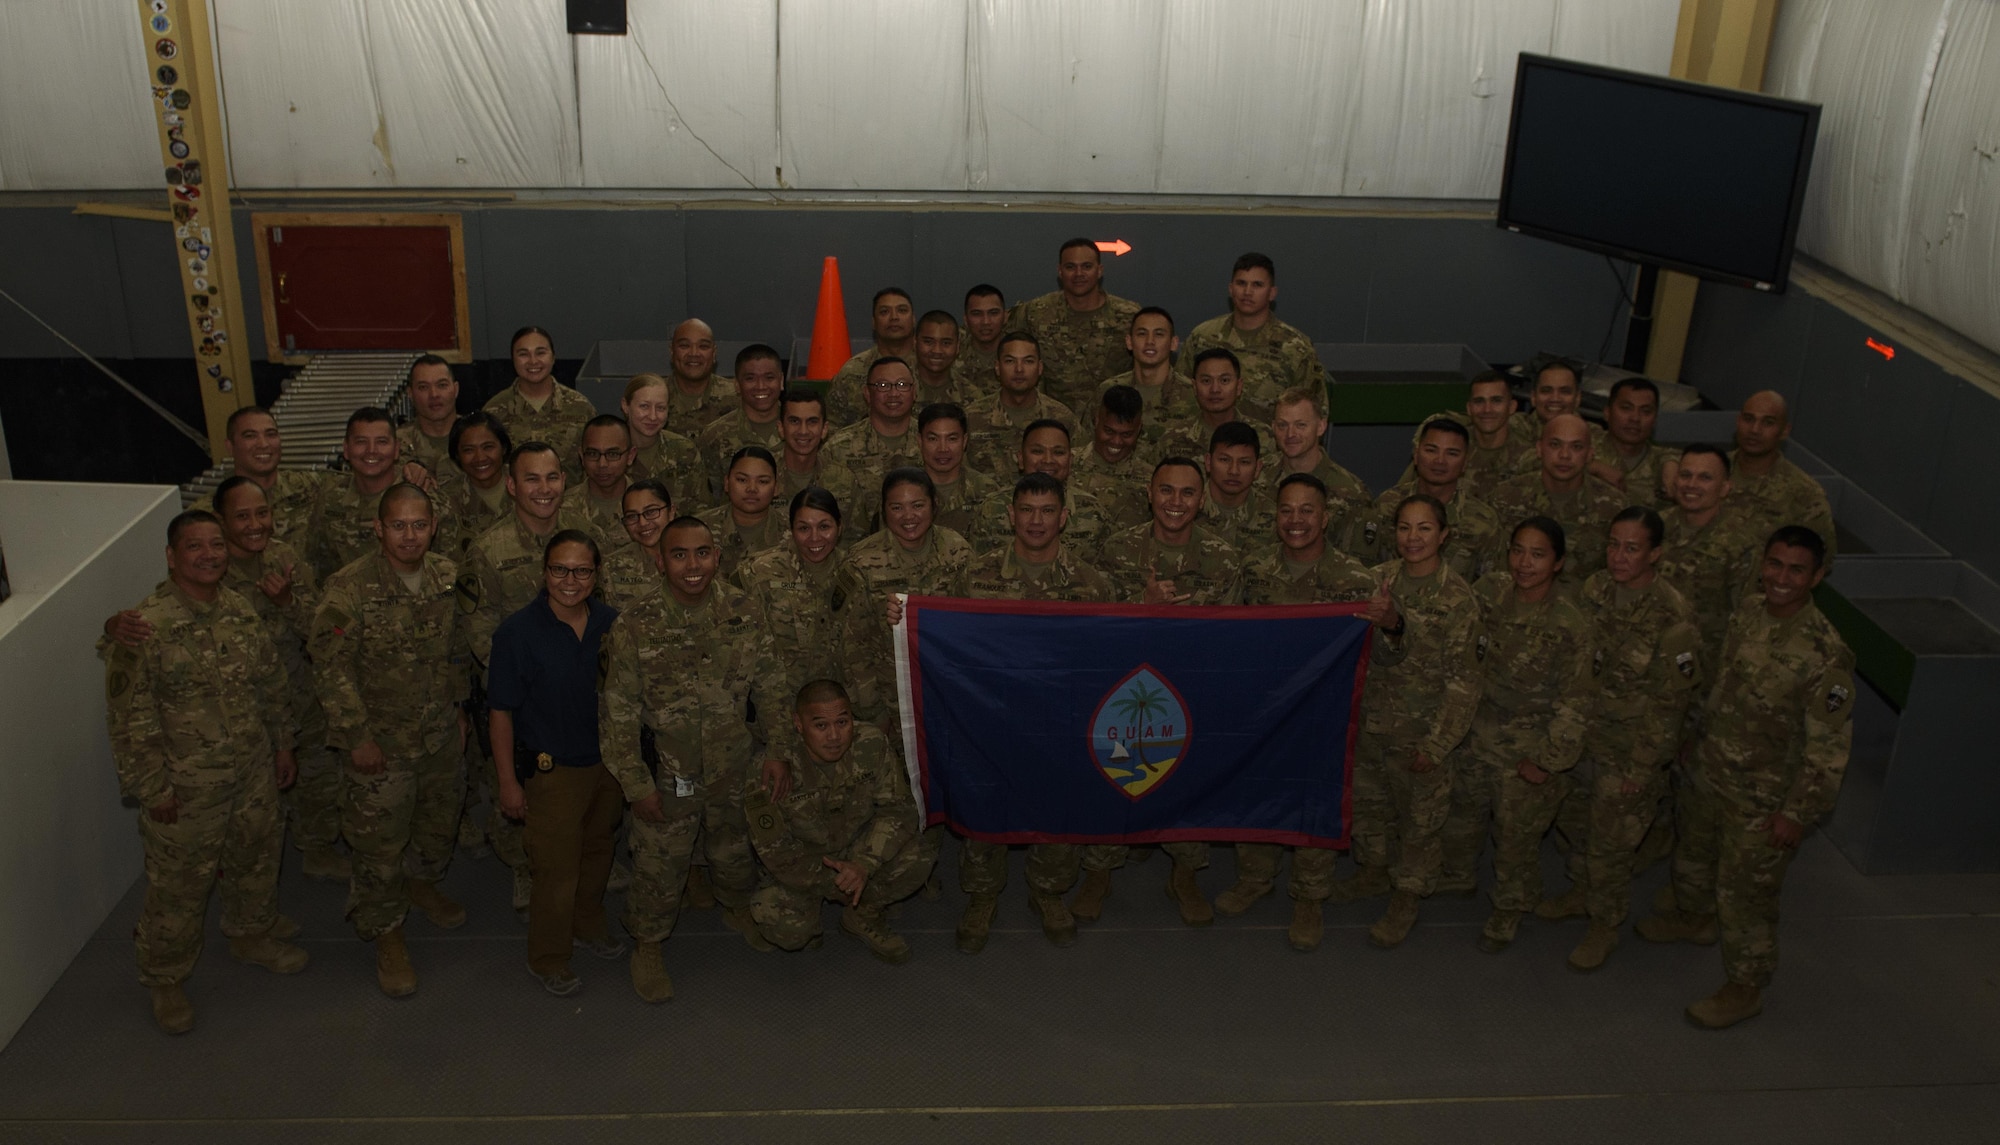 Service members pose for a group photo on Bagram Airfield, Afghanistan, June 7, 2017. Service members from Guam, which has the most military personnel per capita, have a large footprint in Afghanistan. Despite being only 210 square miles large and a having population of only 160,000, multiple service members and civilians from the Department of Defense and other government agencies currently serve in the region. (U.S. Air Force photo by Staff Sgt. Benjamin Gonsier)